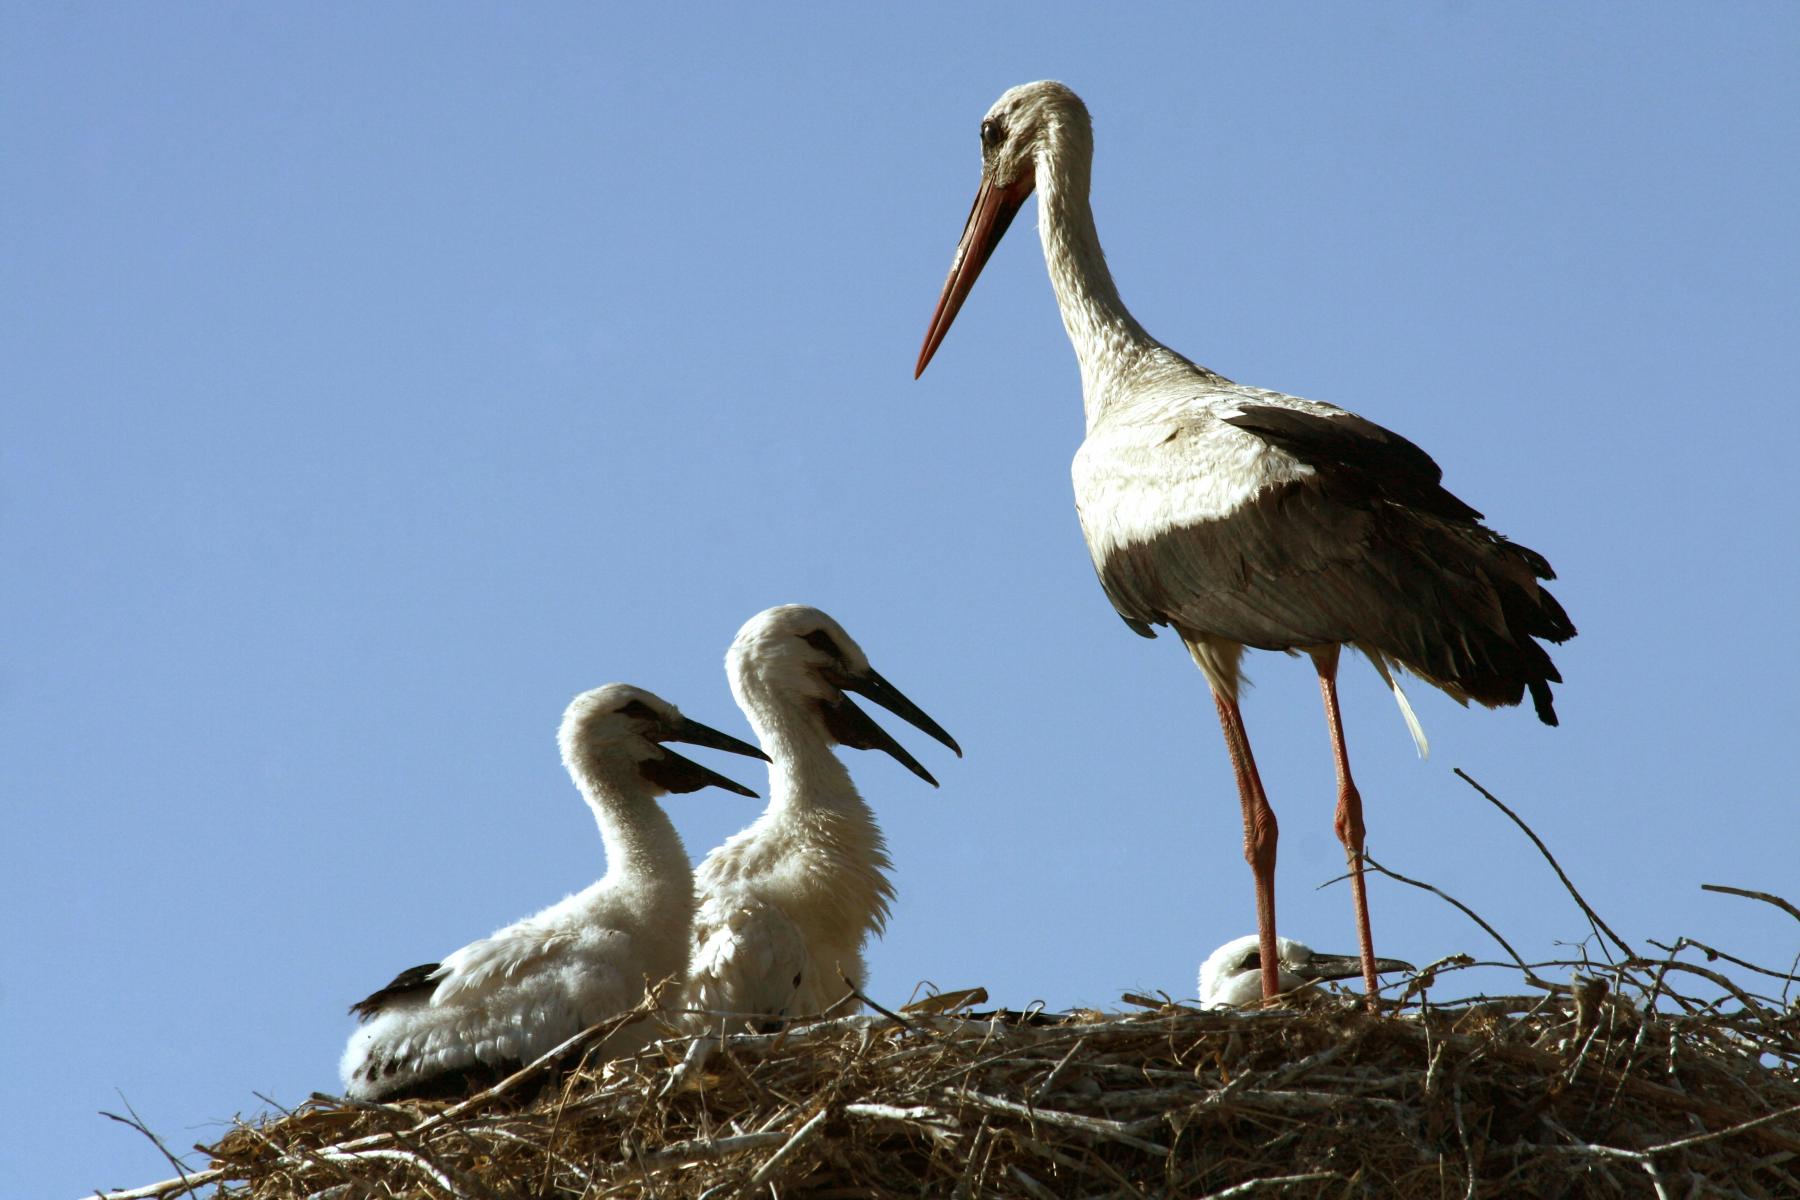 A New Home for Storks